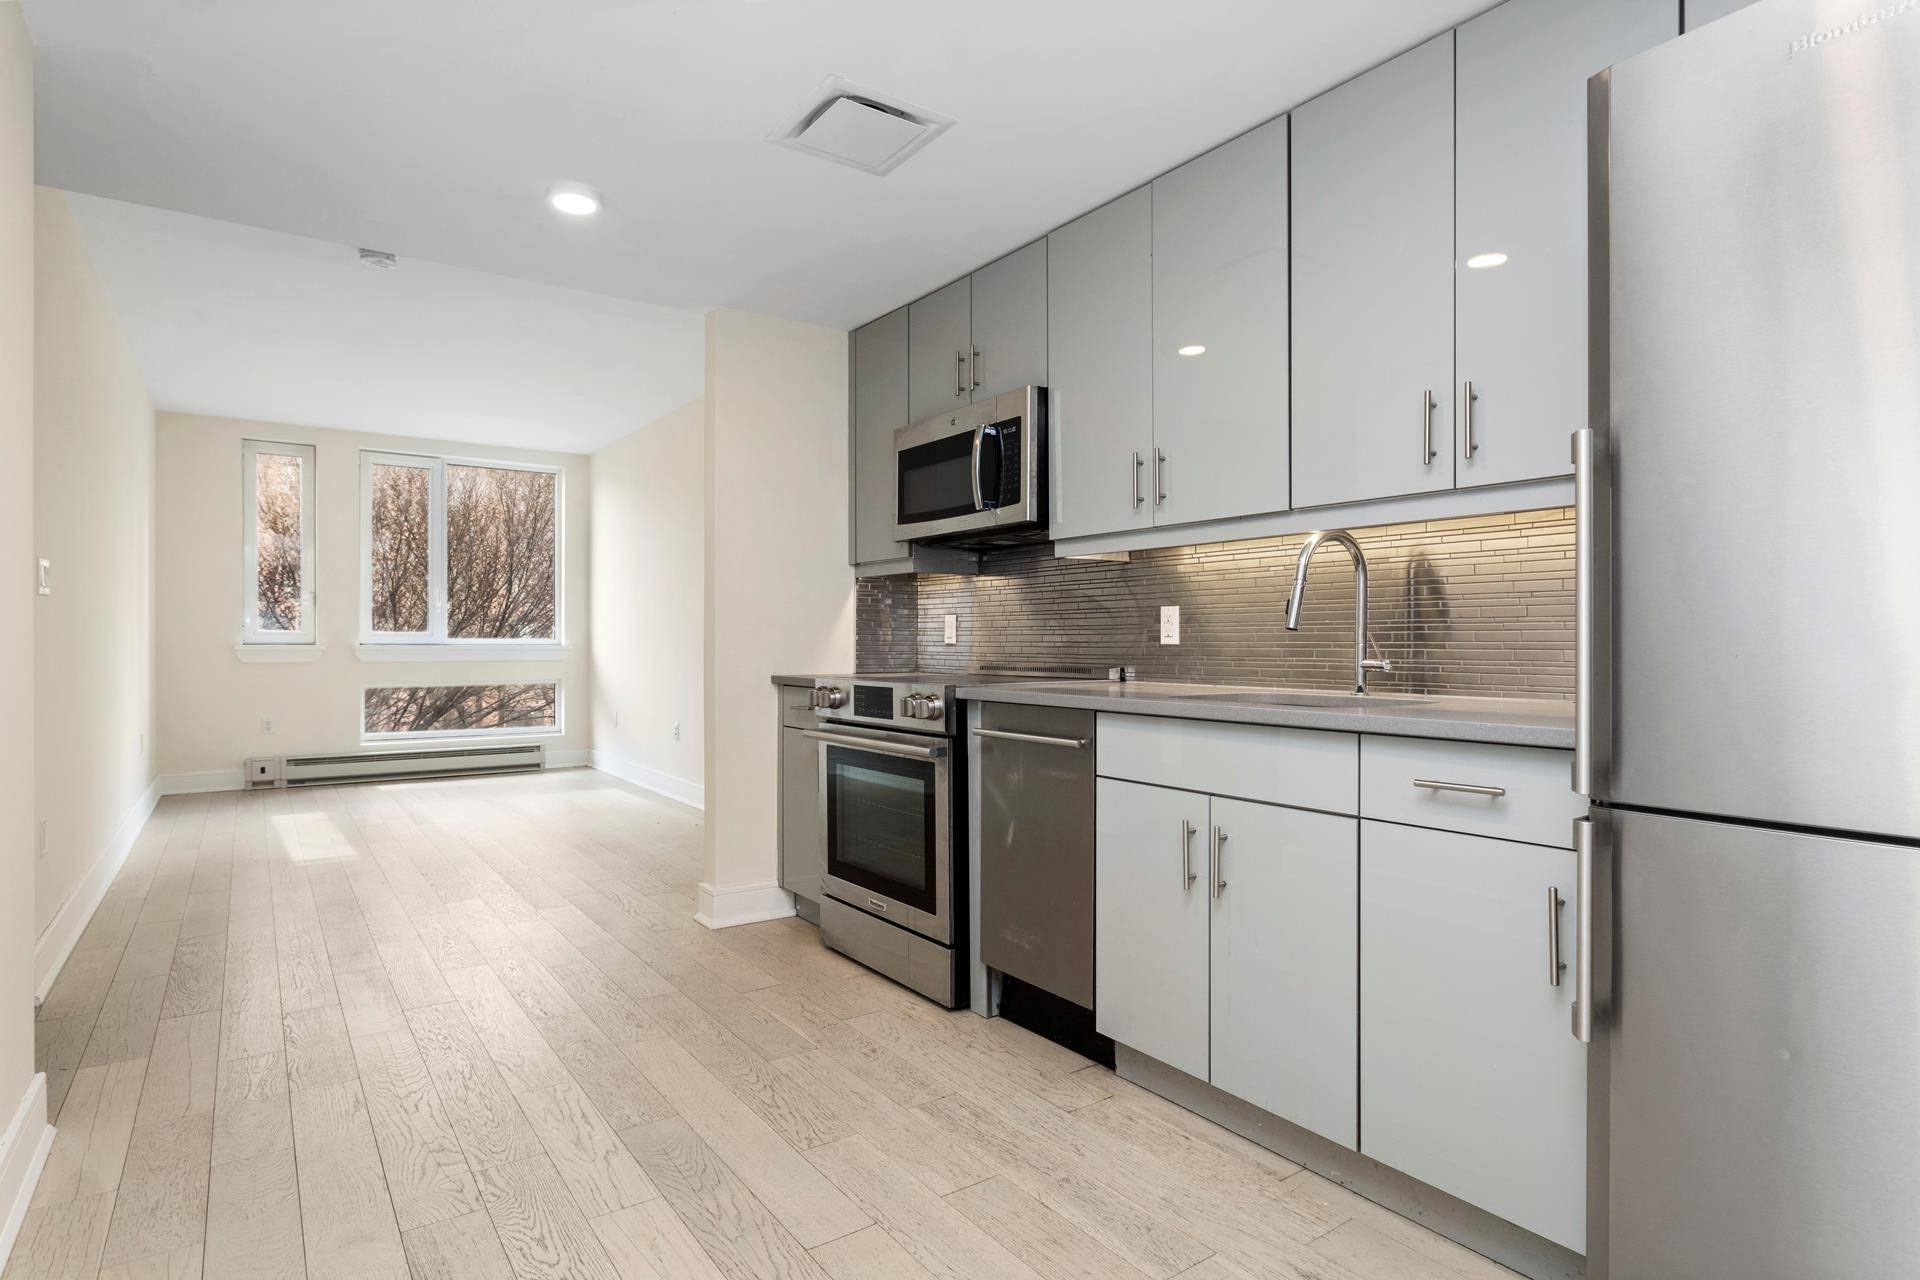 Modern residences at 142nd Street amp ; Frederick Douglas Blvd2 Bed 2 Full Bath apartment Elevator Laundry Resident super Dishwasher Central AC Roof deck Video Intercom306 West 142nd Street brings ...